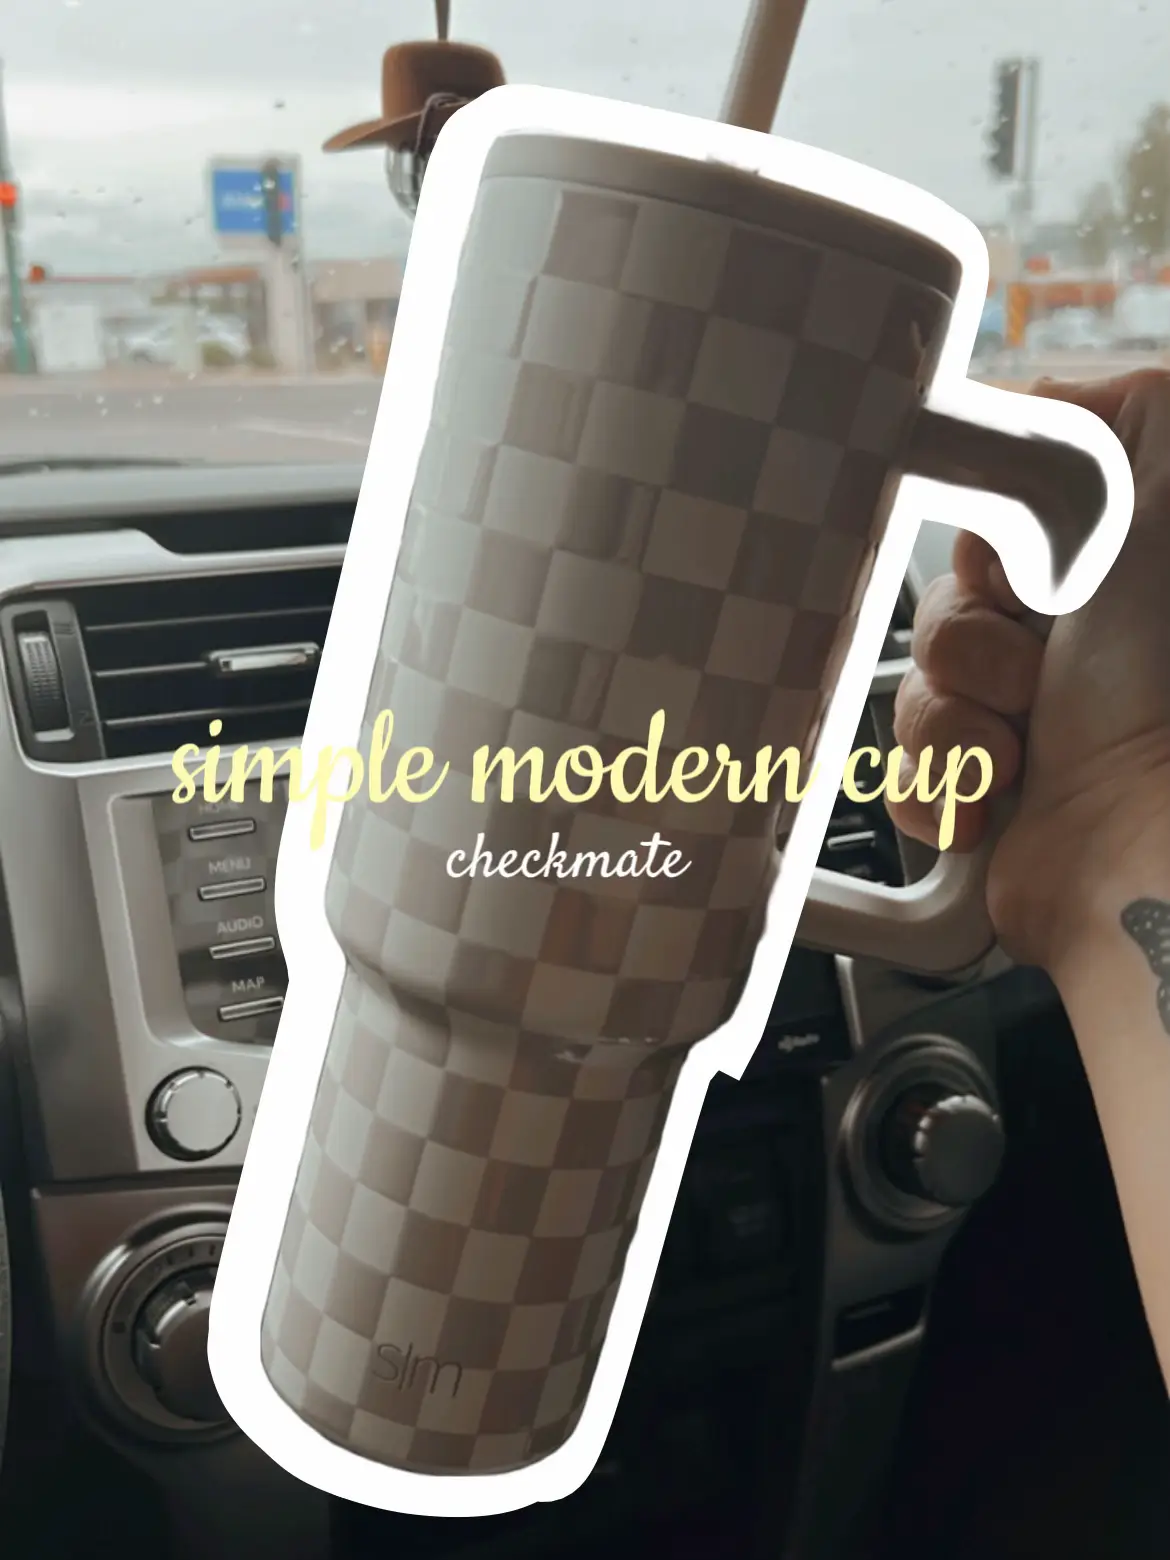 Trendy Cup Alert, Gallery posted by mic_laila